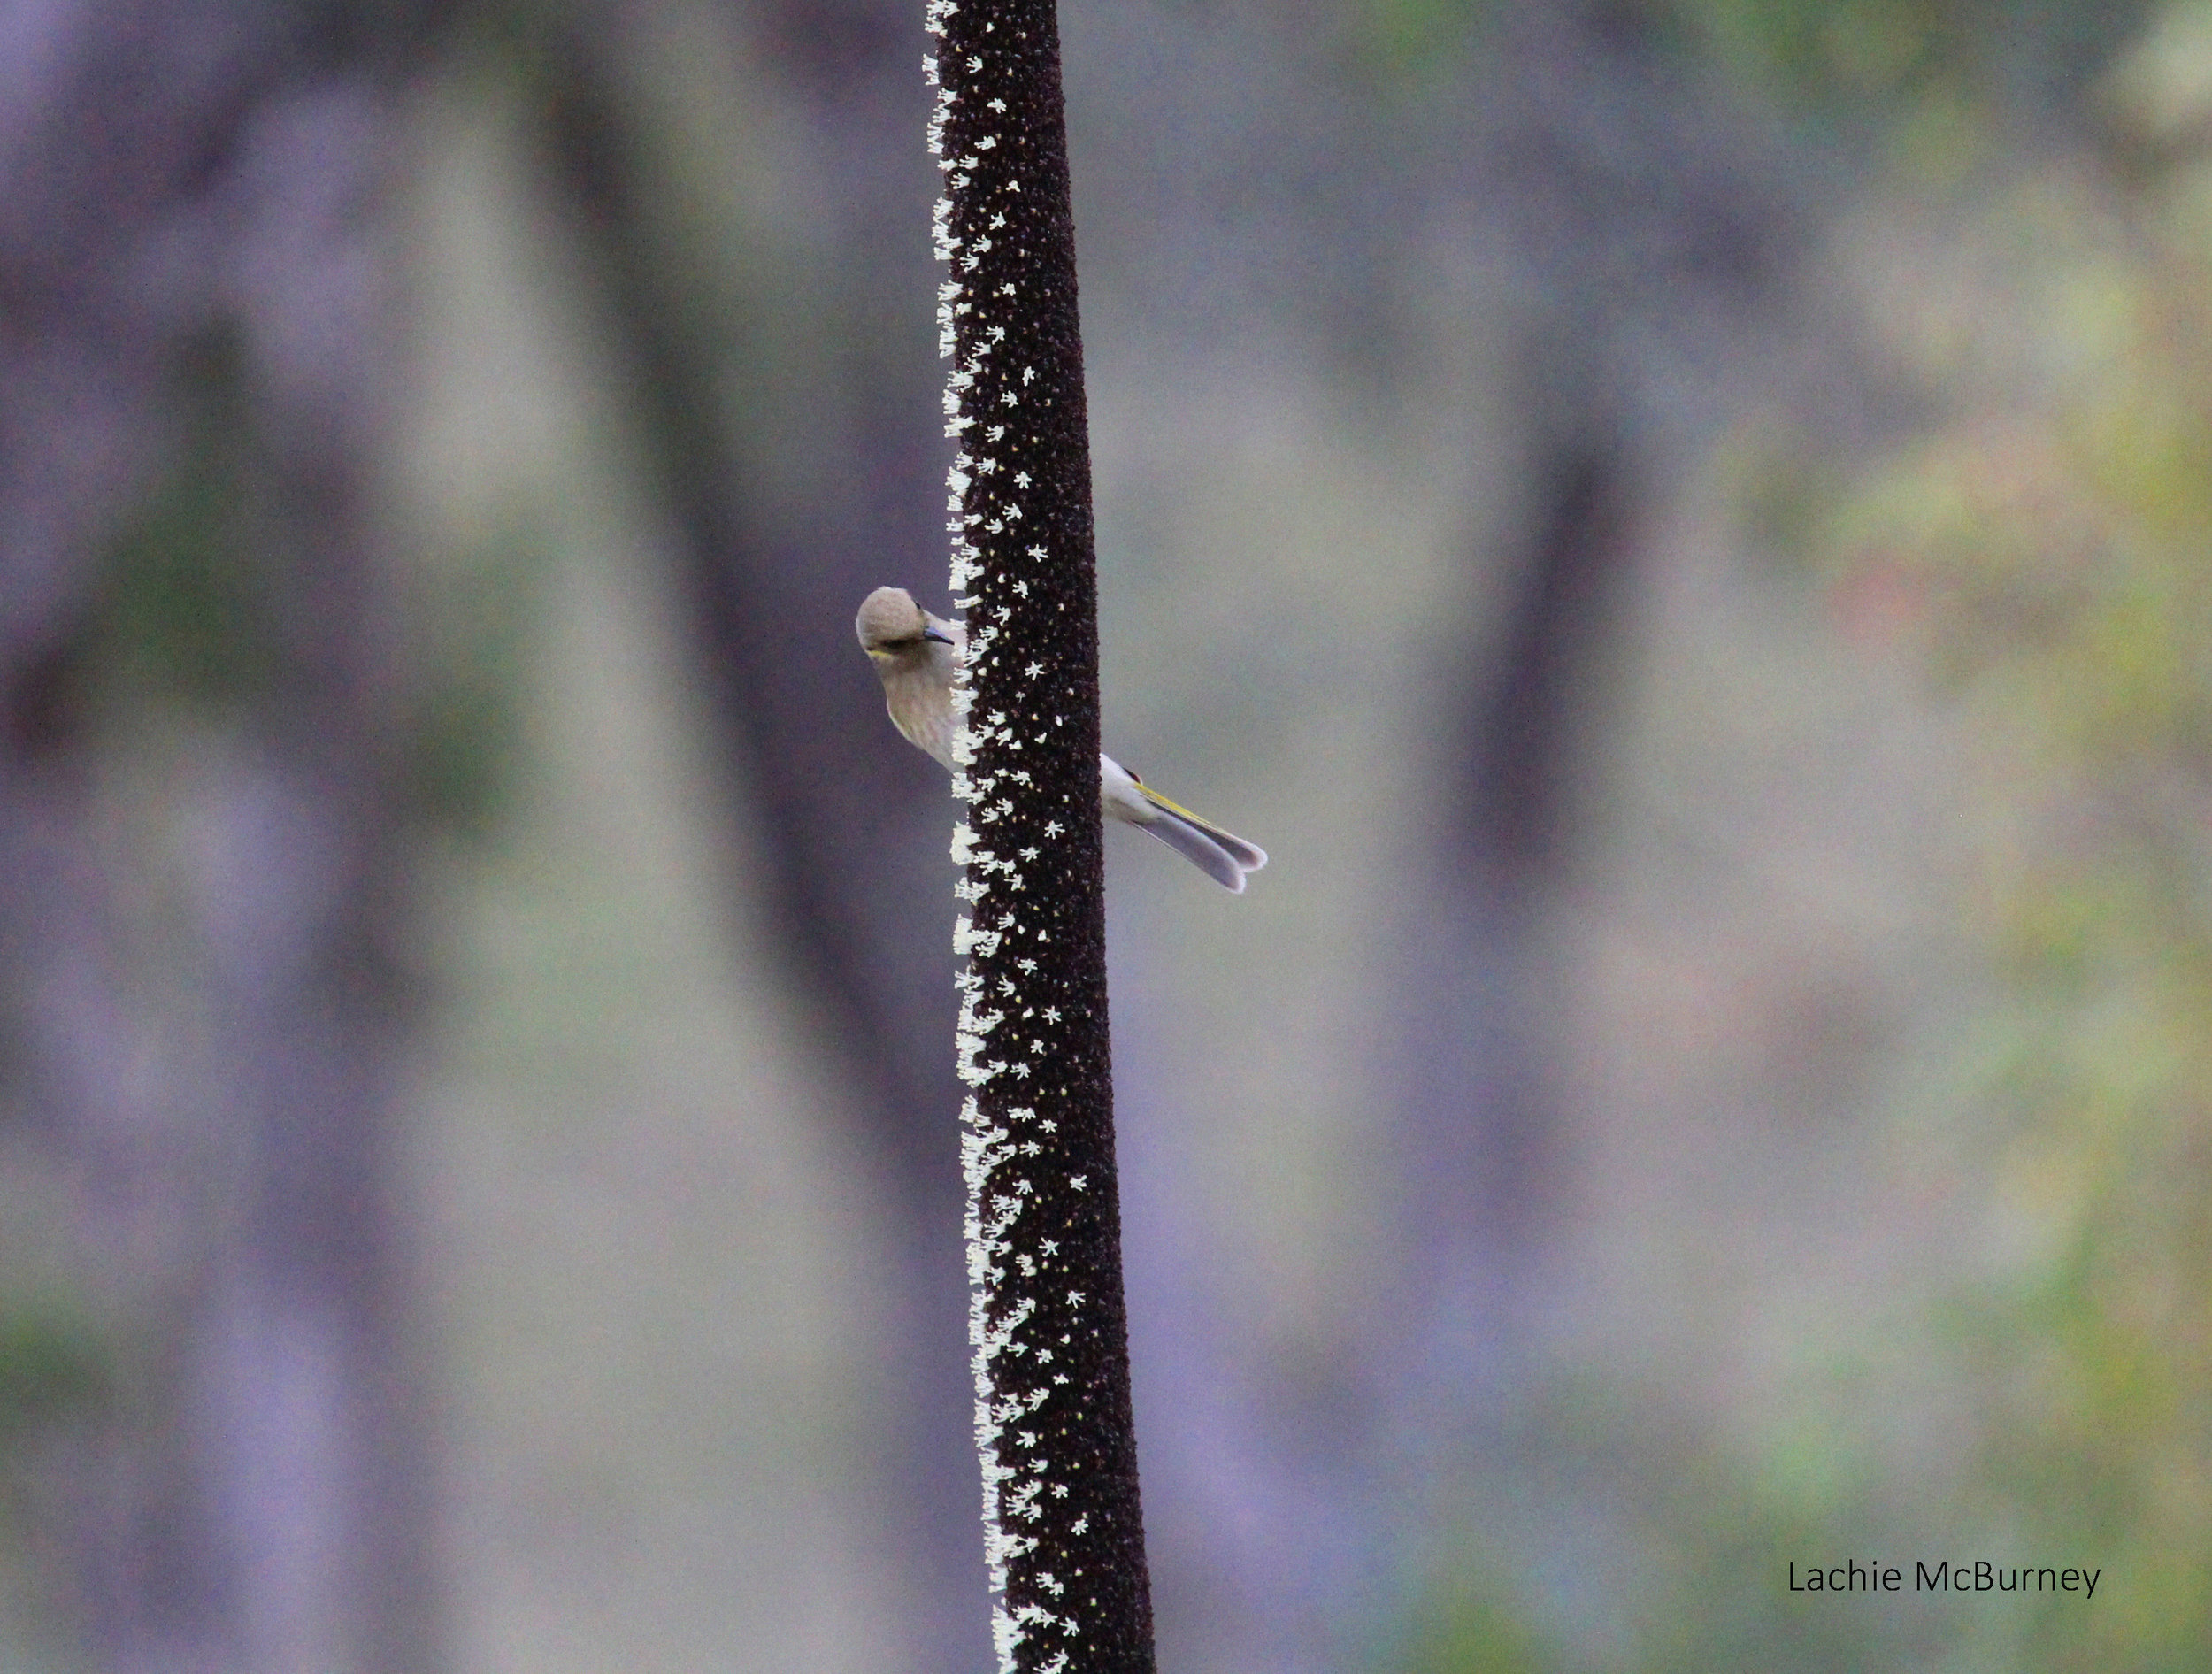   Fuscous Honeyeater feeds on the flowering spike of a grass tree.&nbsp;    Photo: Lachie McBurney.  